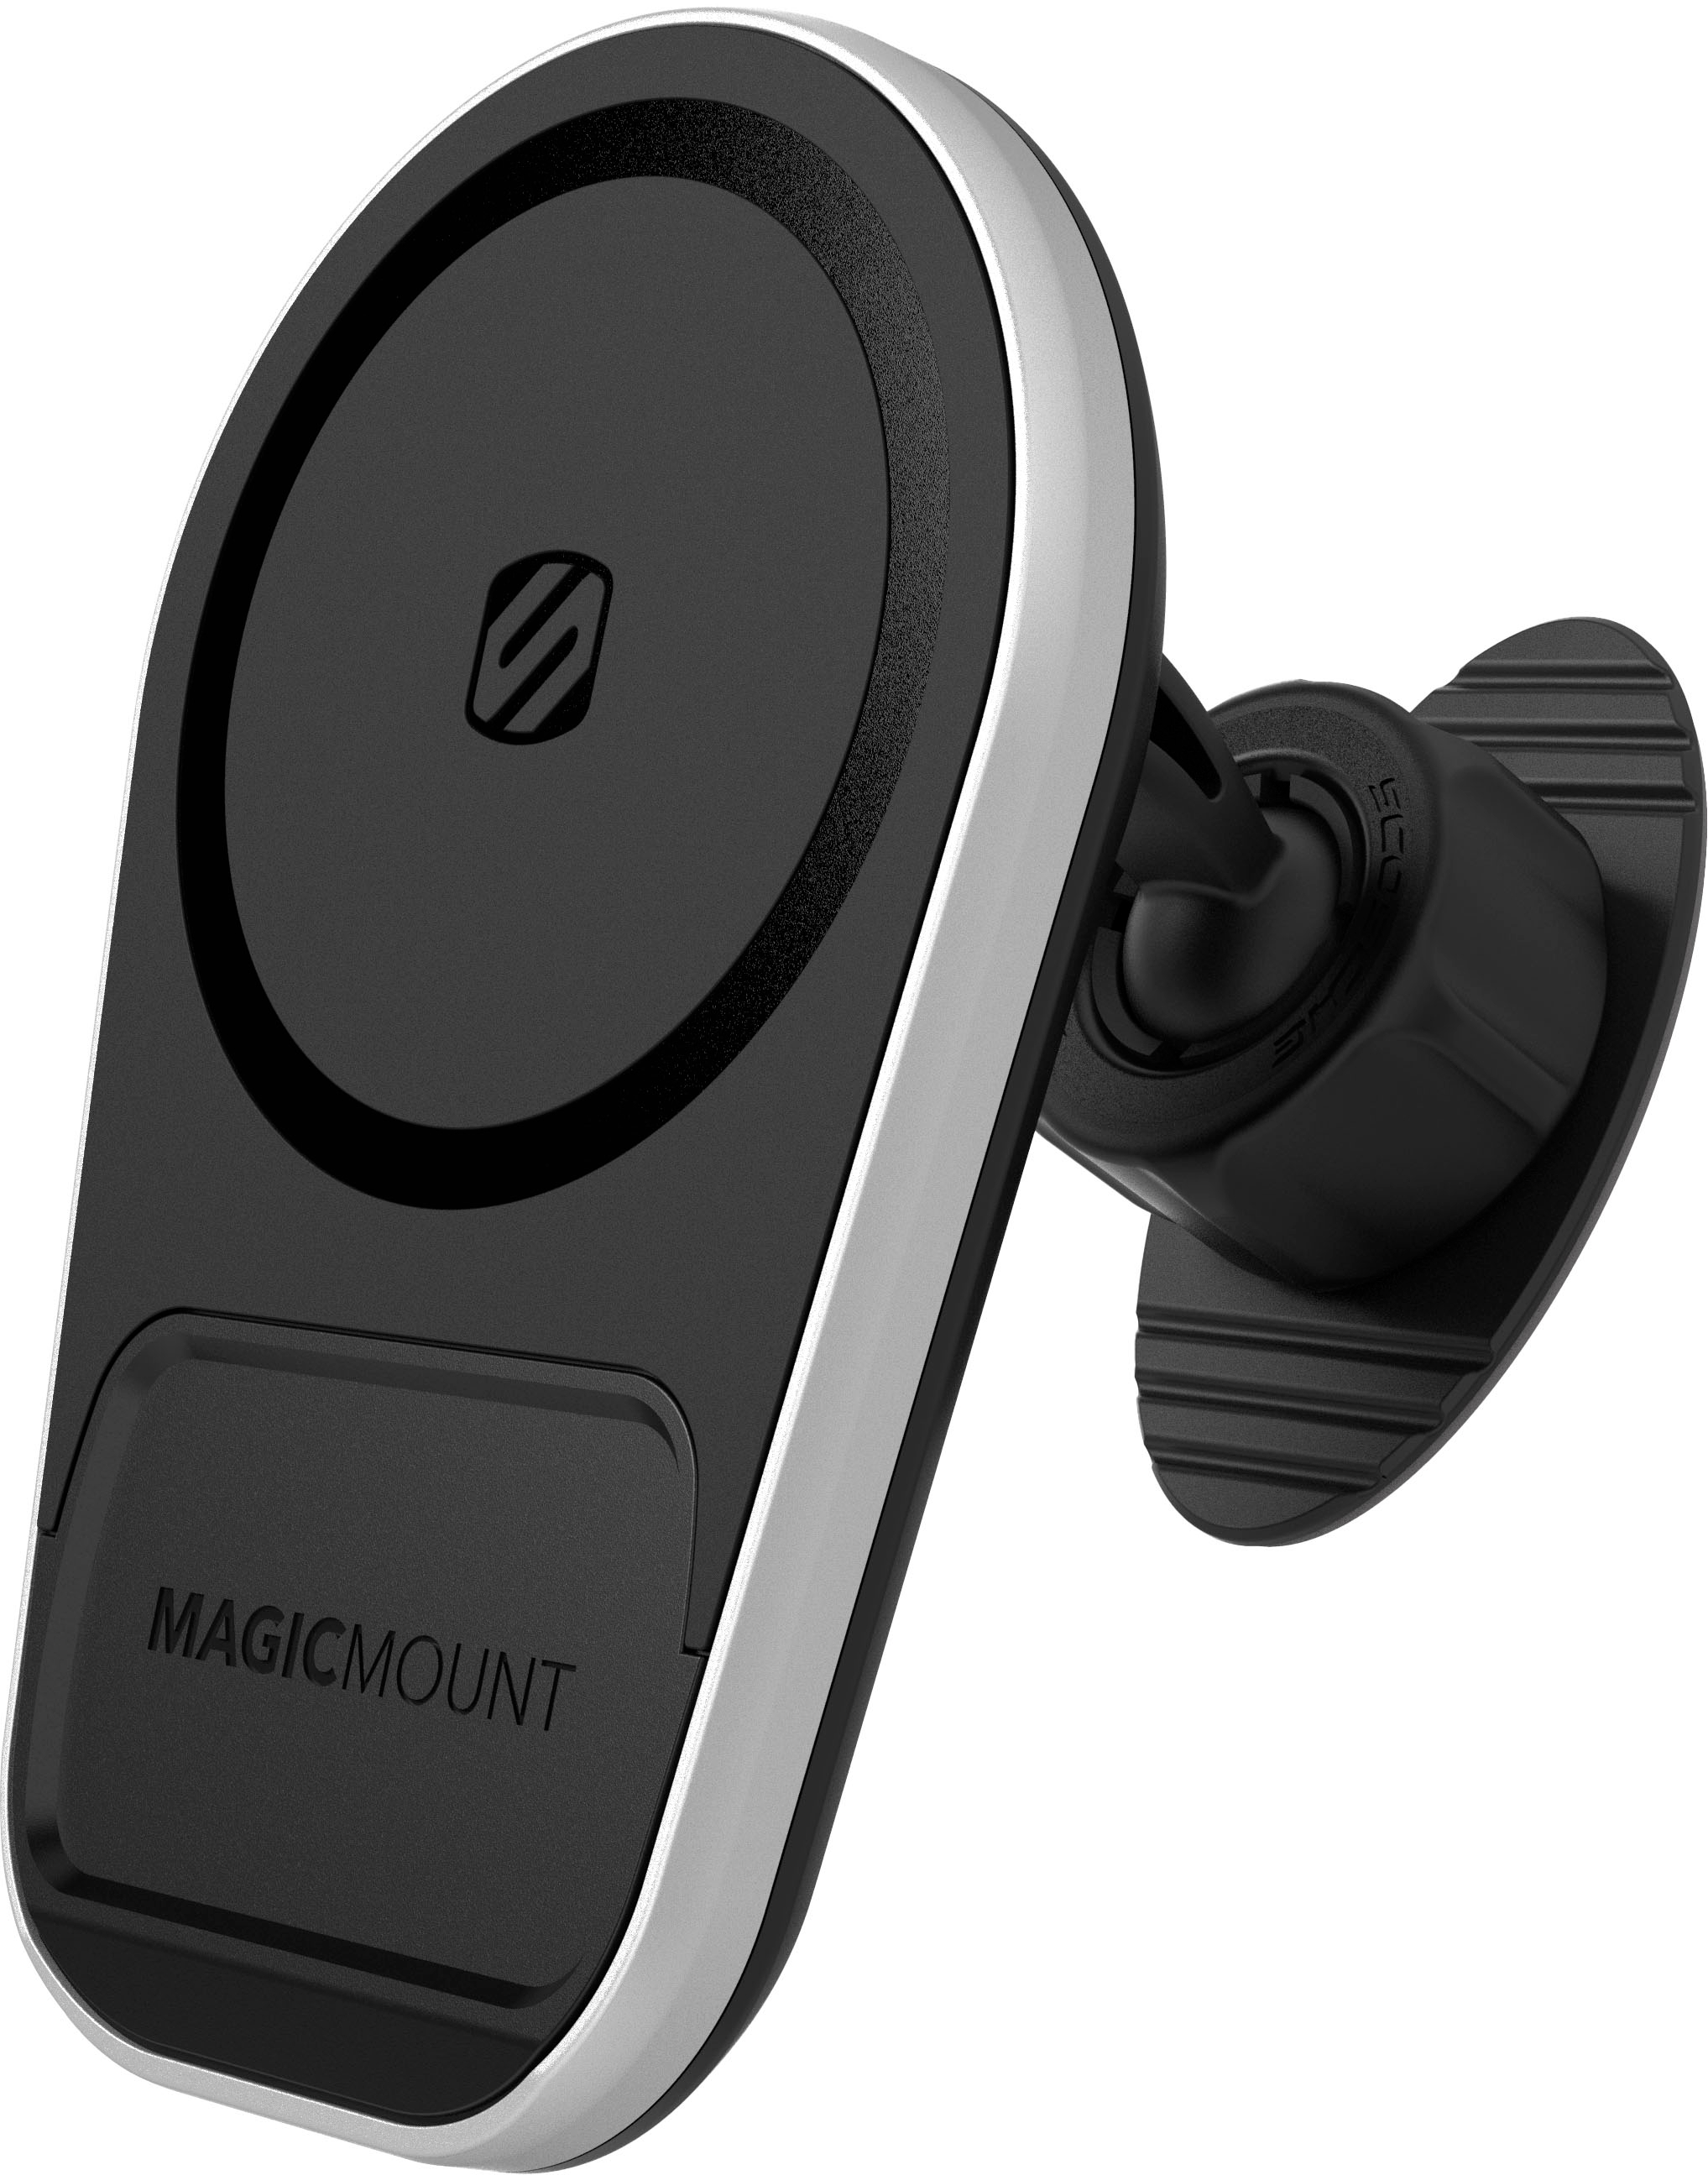 Scosche - MAGICMOUNT Pro Charge 4 Dash / Vent for Most Cell Phones - Black